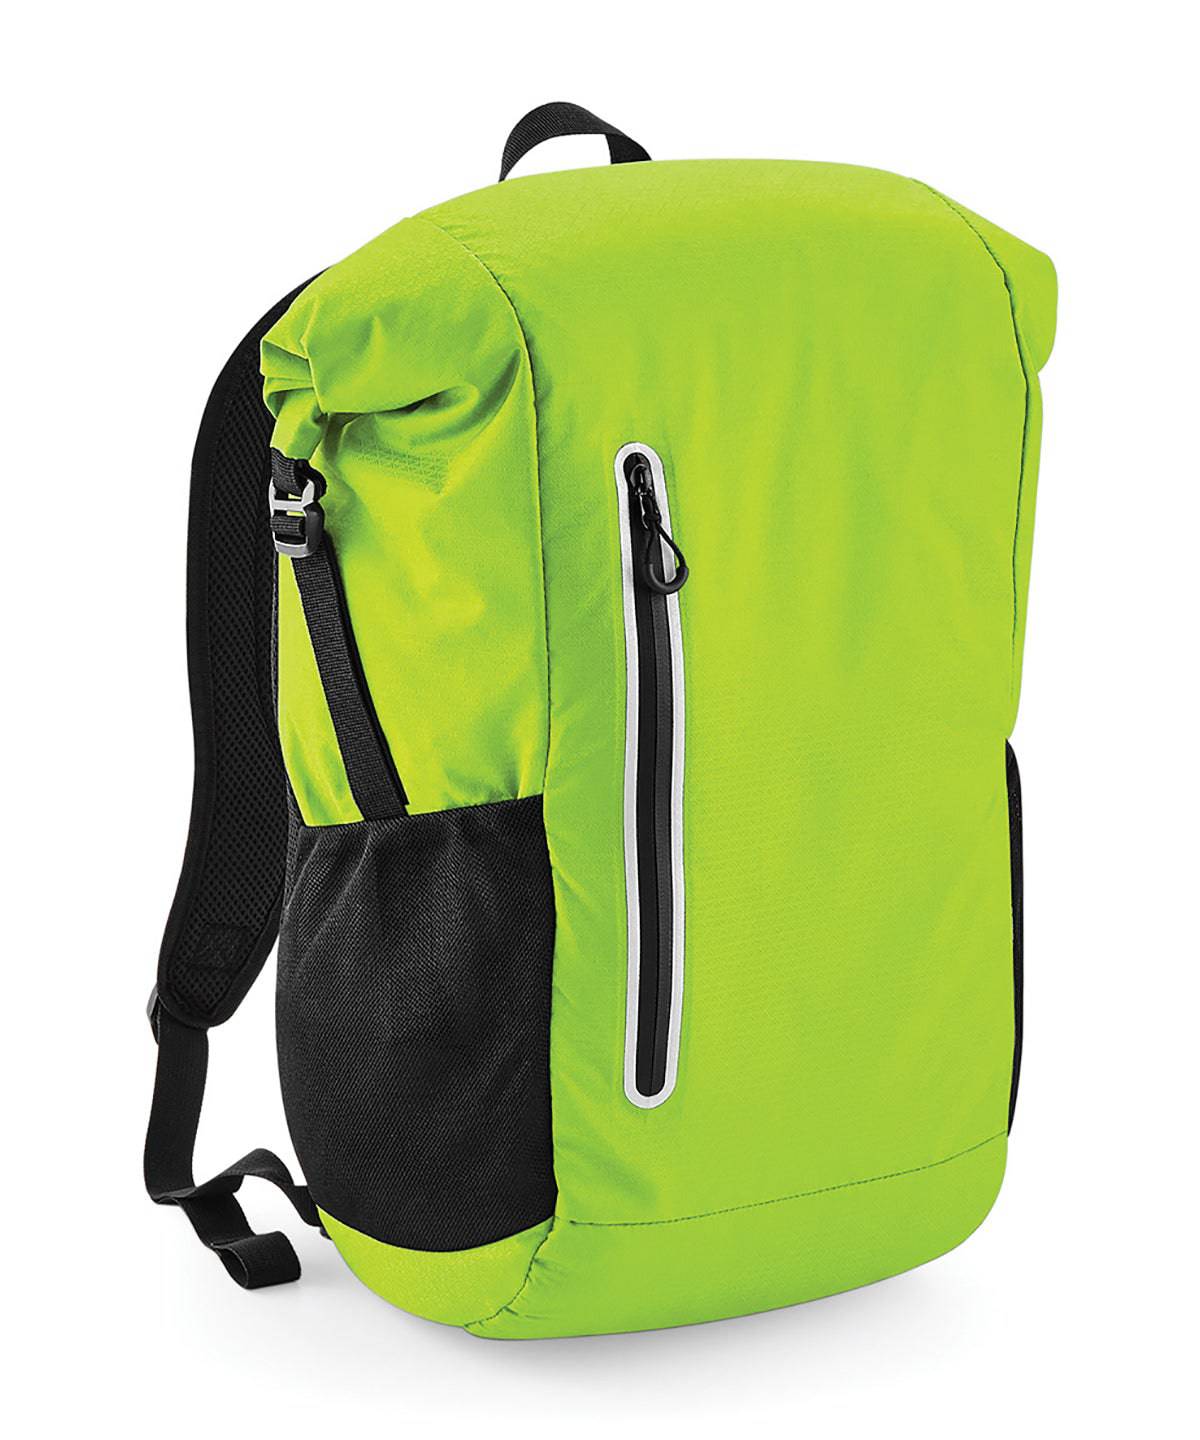 Acid Green - Ath-tech roll-top backpack